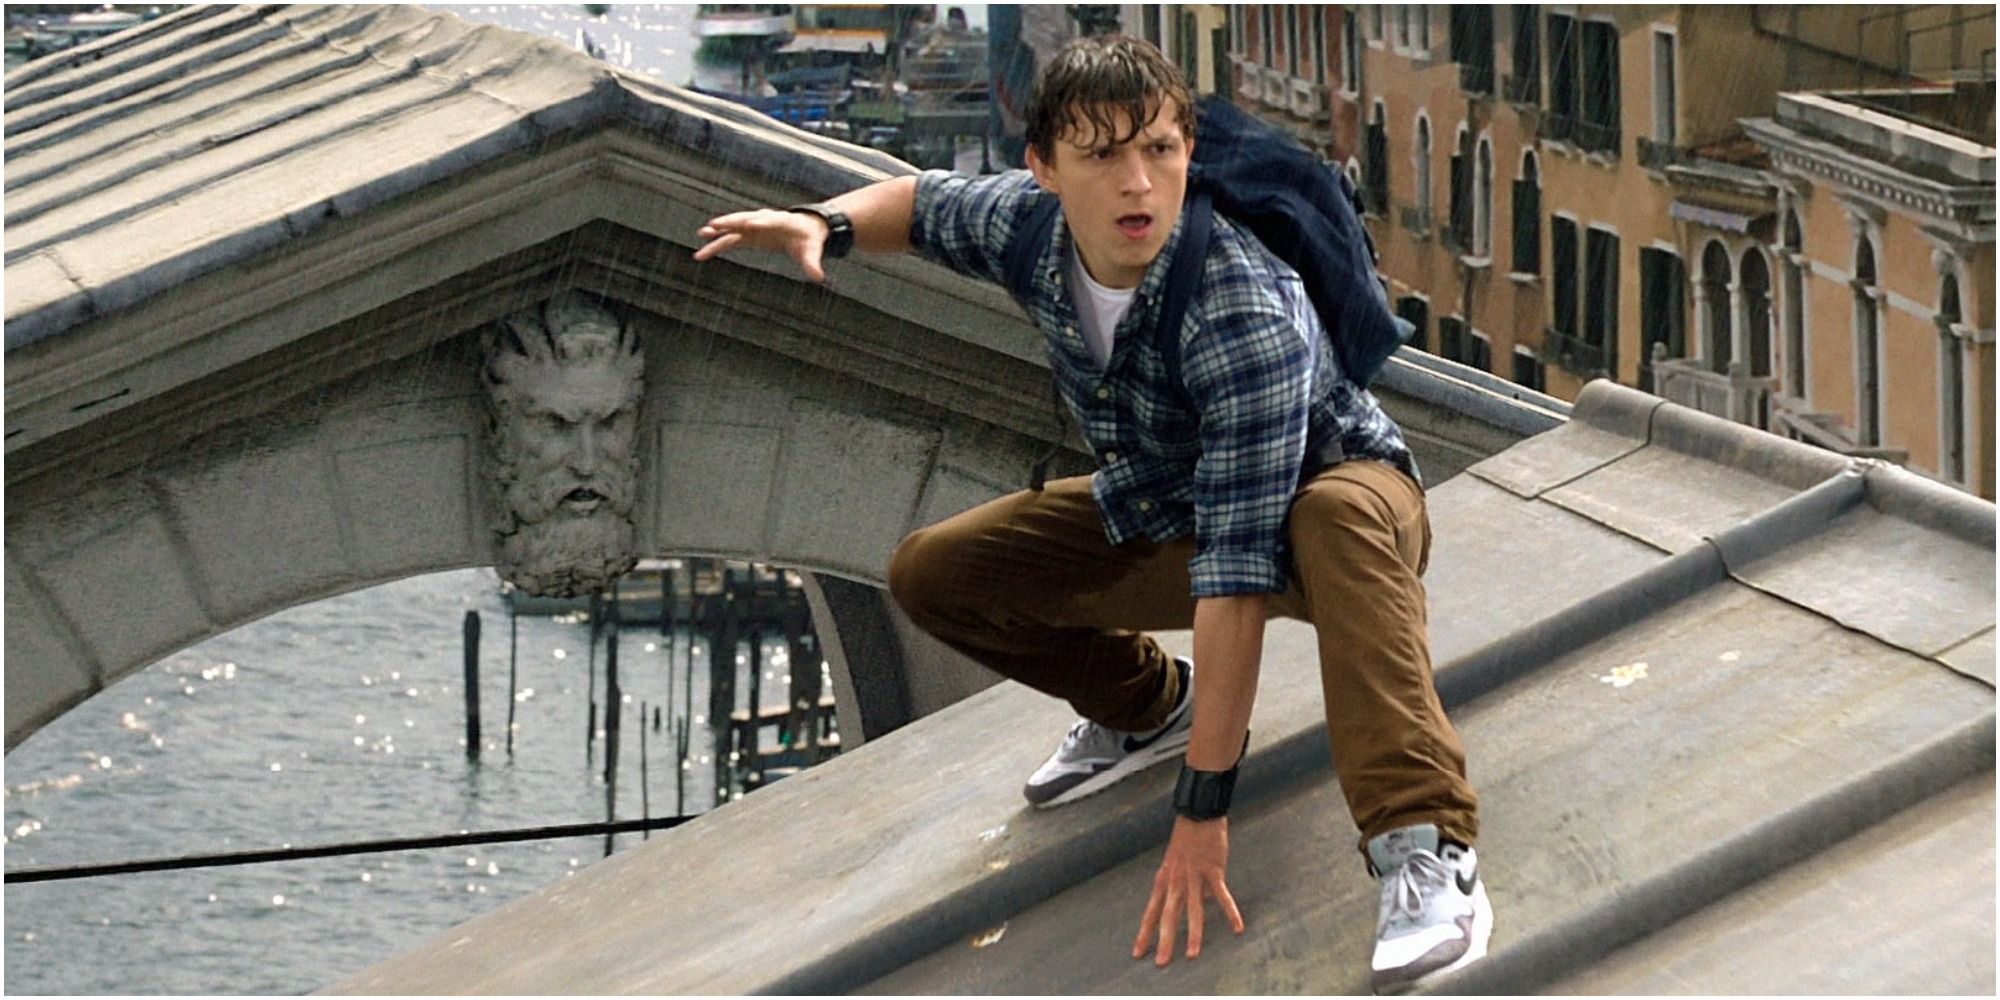 A screenshot of Peter battling the Water Elemental in Spider-Man: Far From Home